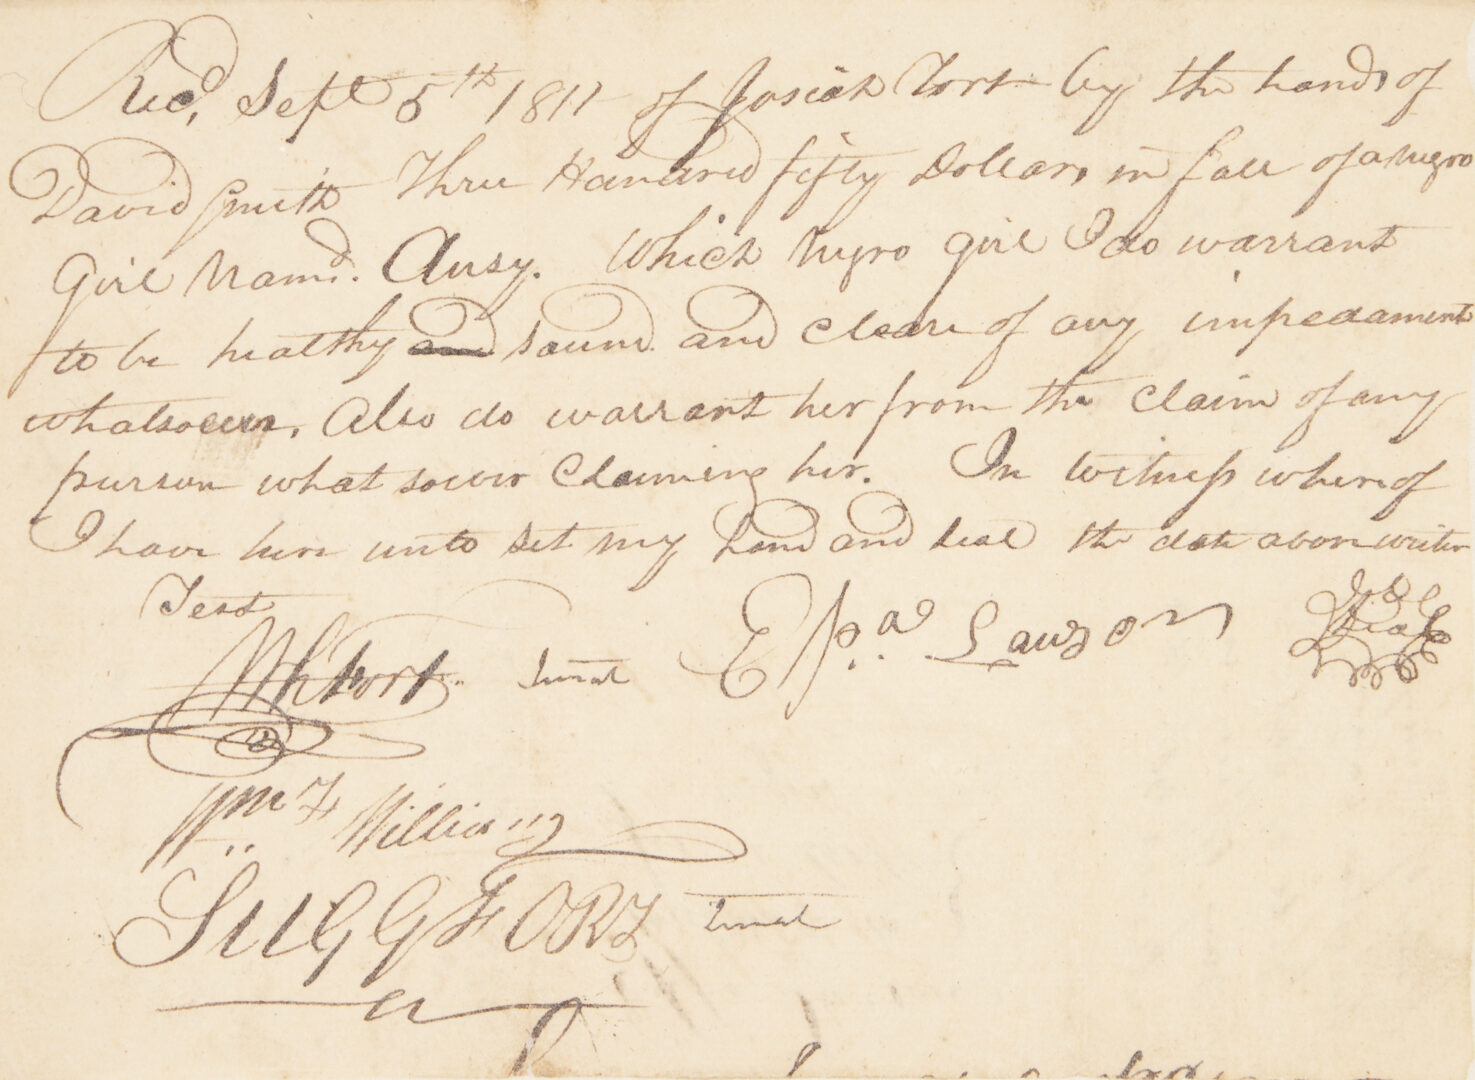 Lot 568: Fort Family of NC/TN Archive, 19 items including Slave Receipts, Land Grants